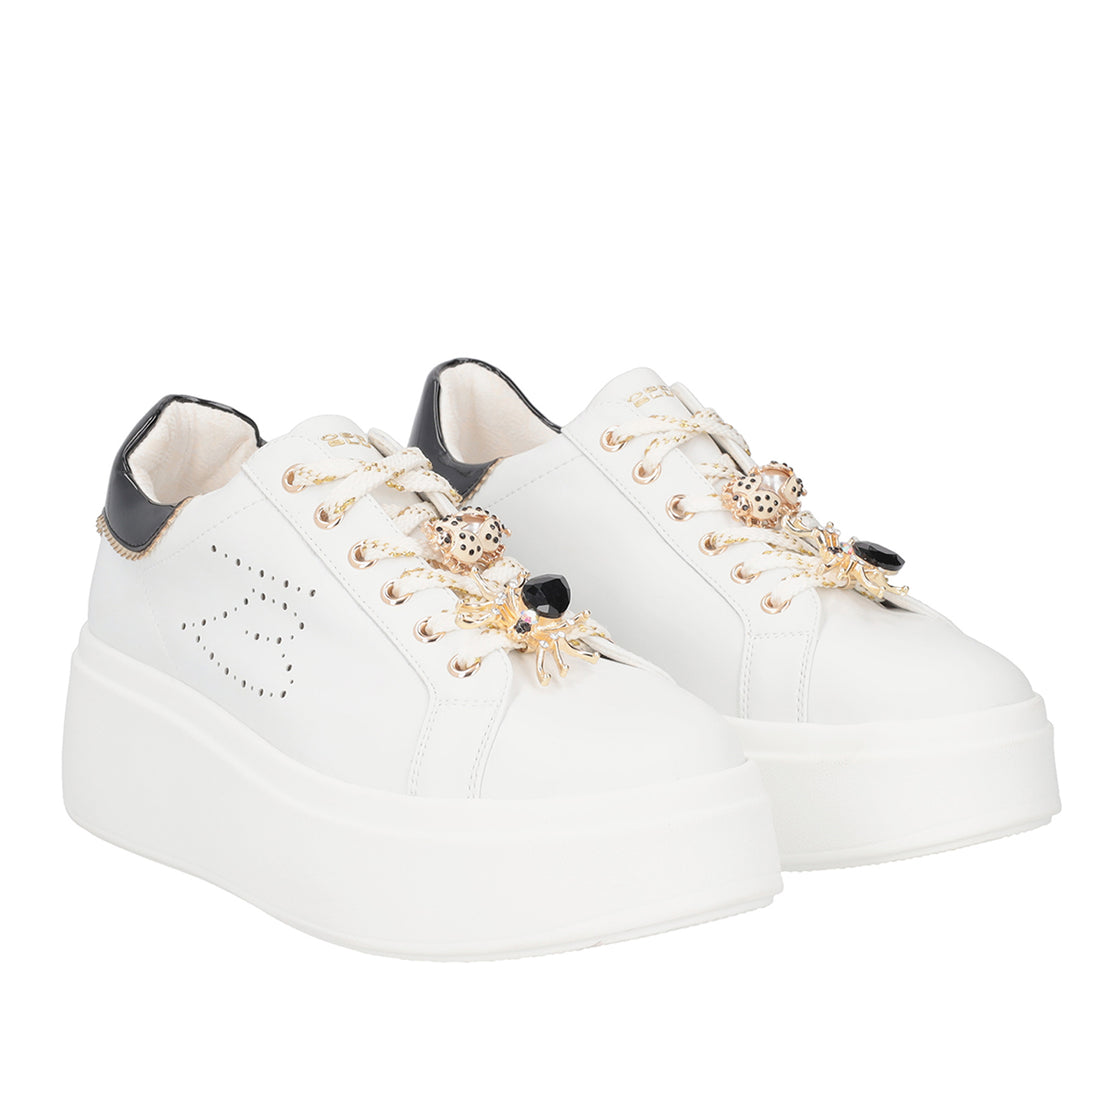 WHITE/BLACK VANITY SNEAKER WITH JEWEL LADYBUGS AND SPIDERS